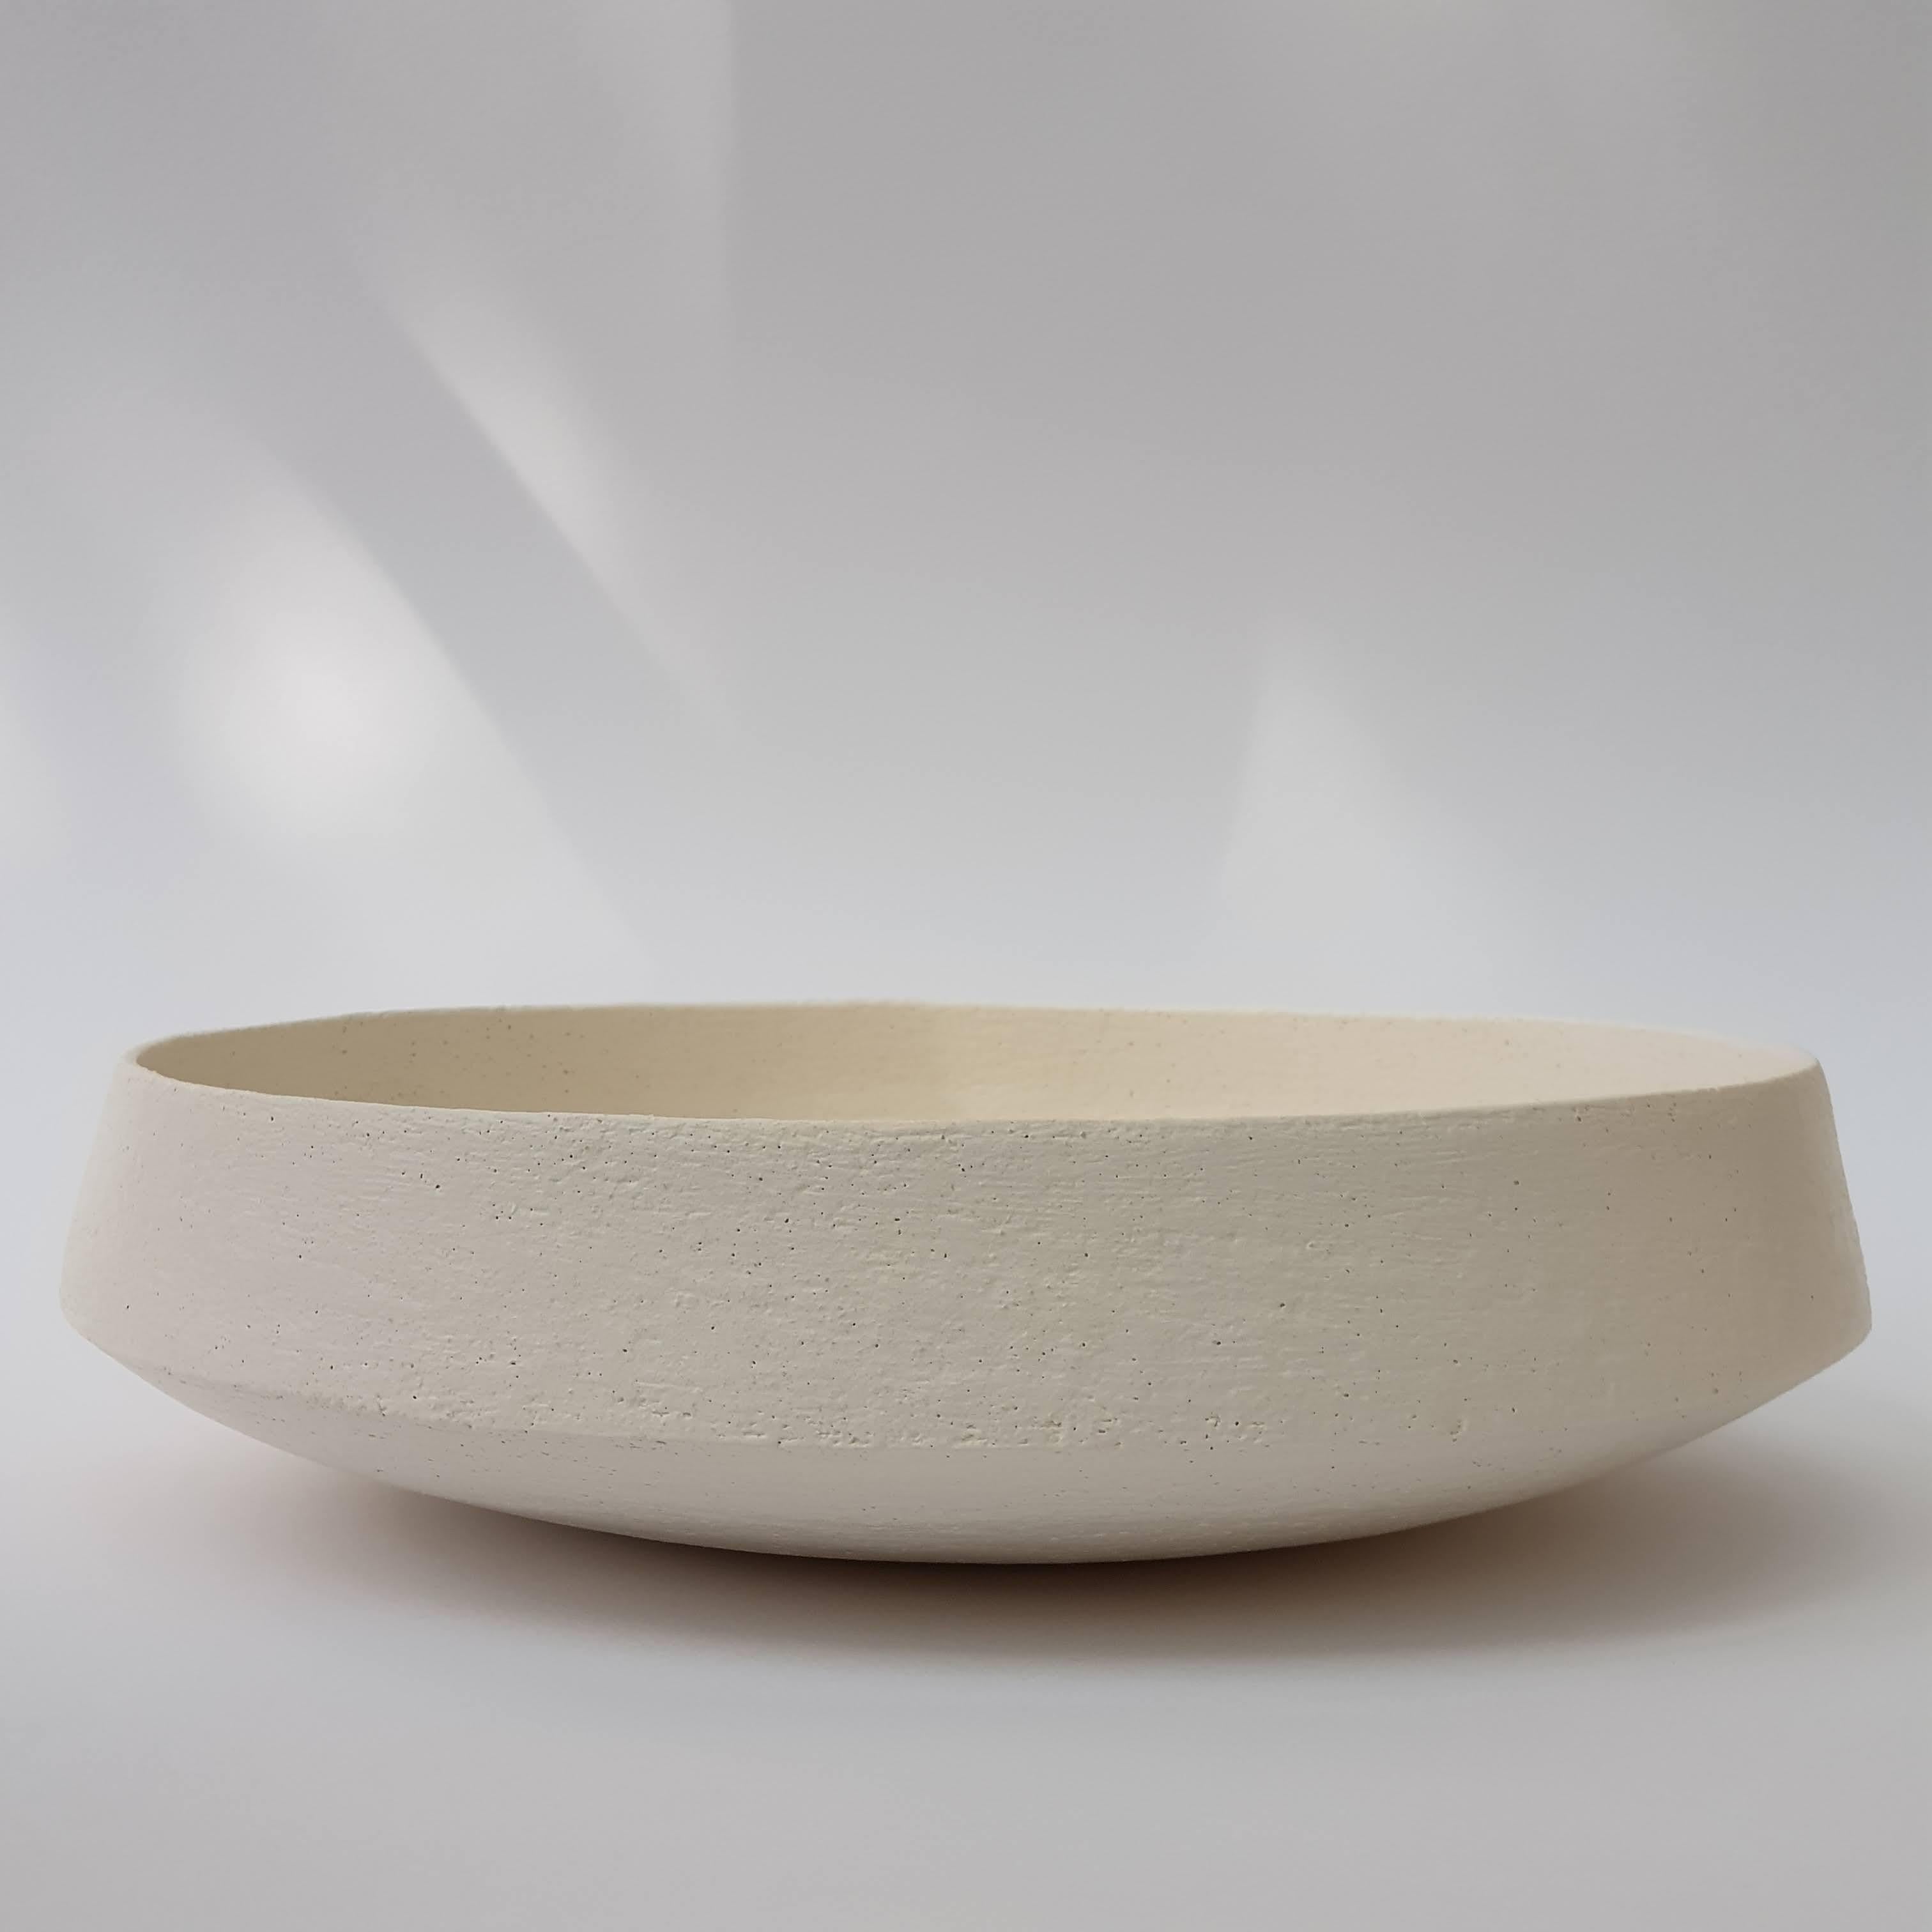 White Stoneware Pinakio Plate by Elena Vasilantonaki
Unique
Dimensions: ⌀ 34 x H 10 cm (Dimensions may vary)
Materials: Stoneware
Available finishes: With\without handles - Black, White, Grey , Brown, Red, White Patina

Growing up in Greece I was